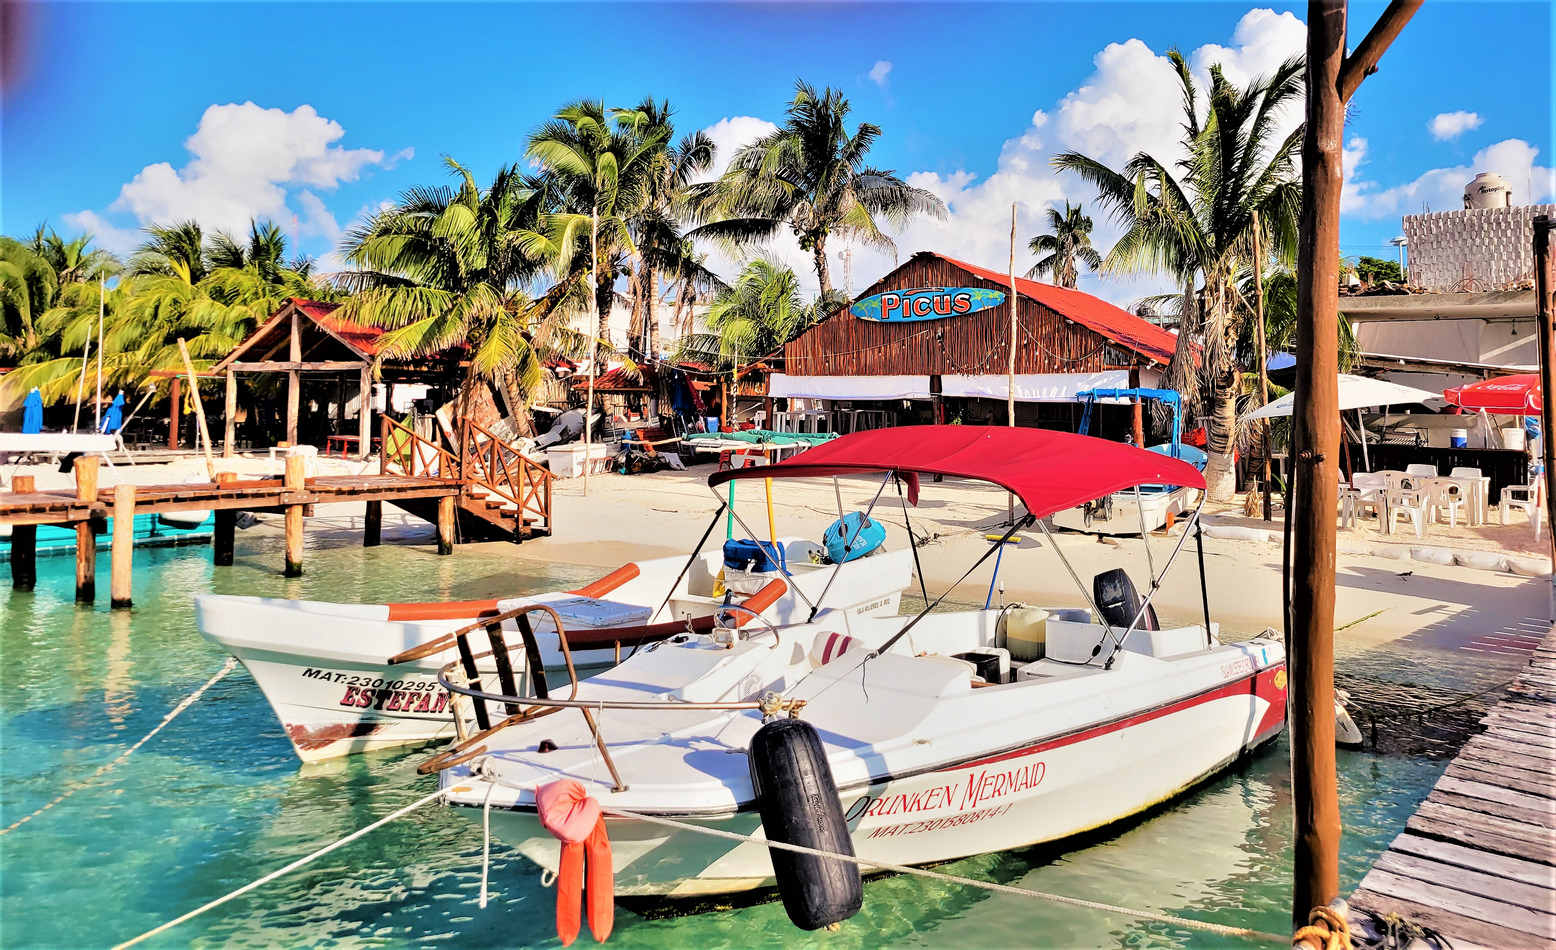 The tour boats dock at the pier in front of the Miramar Lobster House, celebrating its 50th year in business this year. © 2021 Jane Simon Ammeson